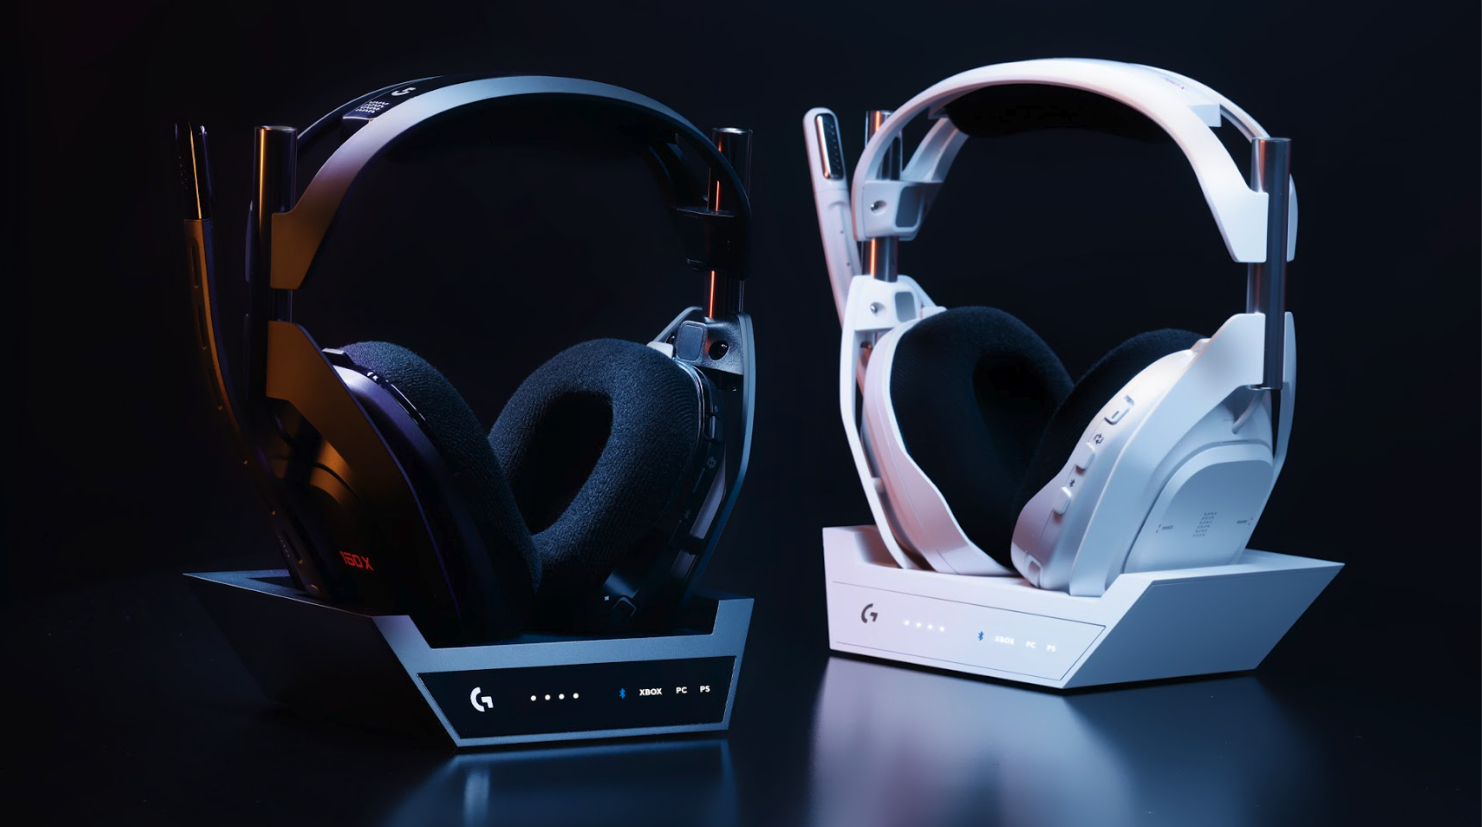 One black and one white version of the Logitech G Astro A50X headset